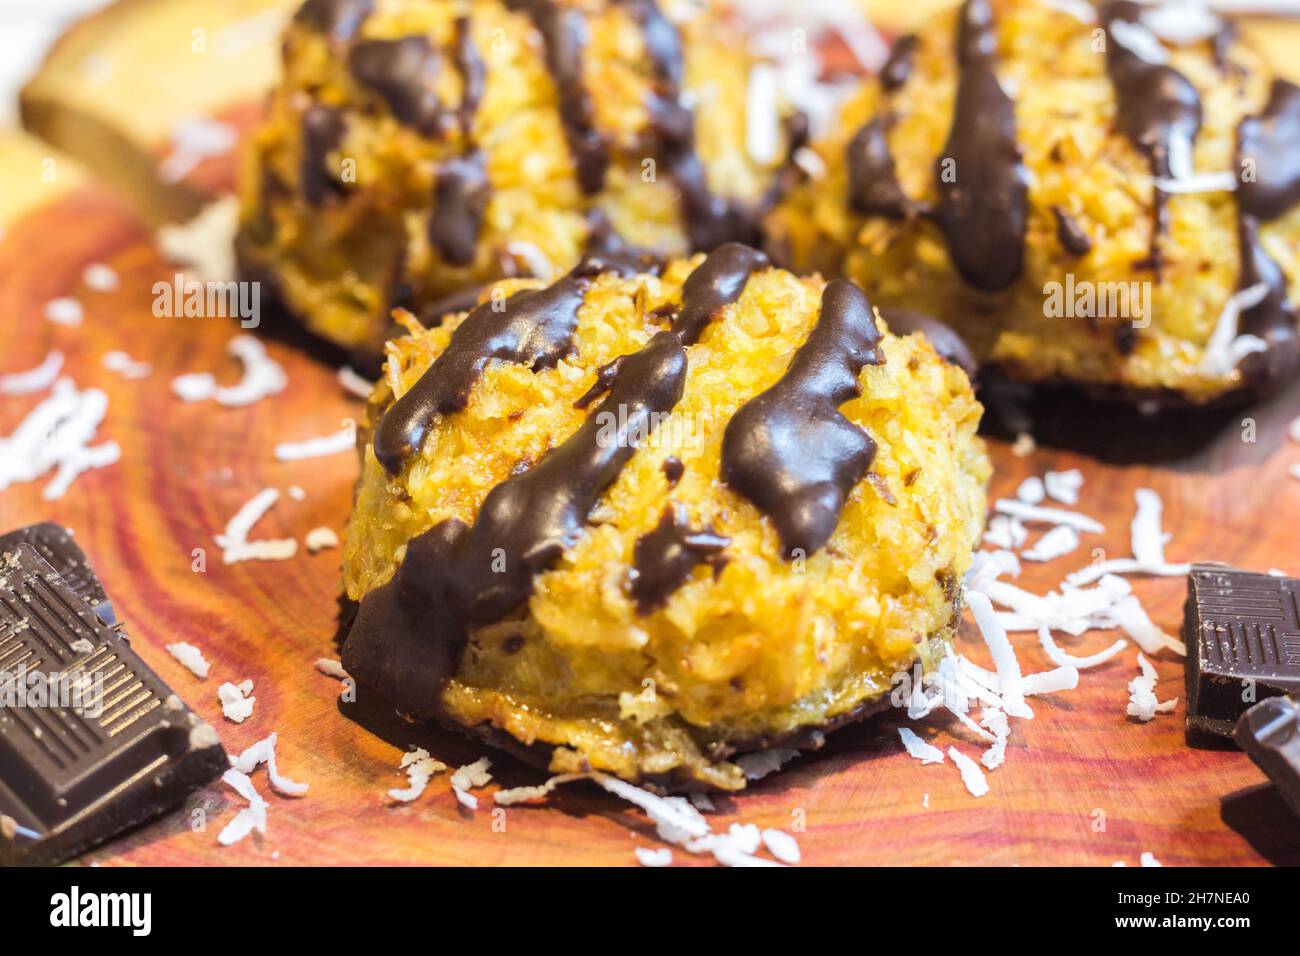 Coconut Macaroons with Dark Chocolate Drizzle Served on Cherry Wooden Board Garnished with Chocolate Pieces and Coconut Shavings, Selective Focus Stock Photo